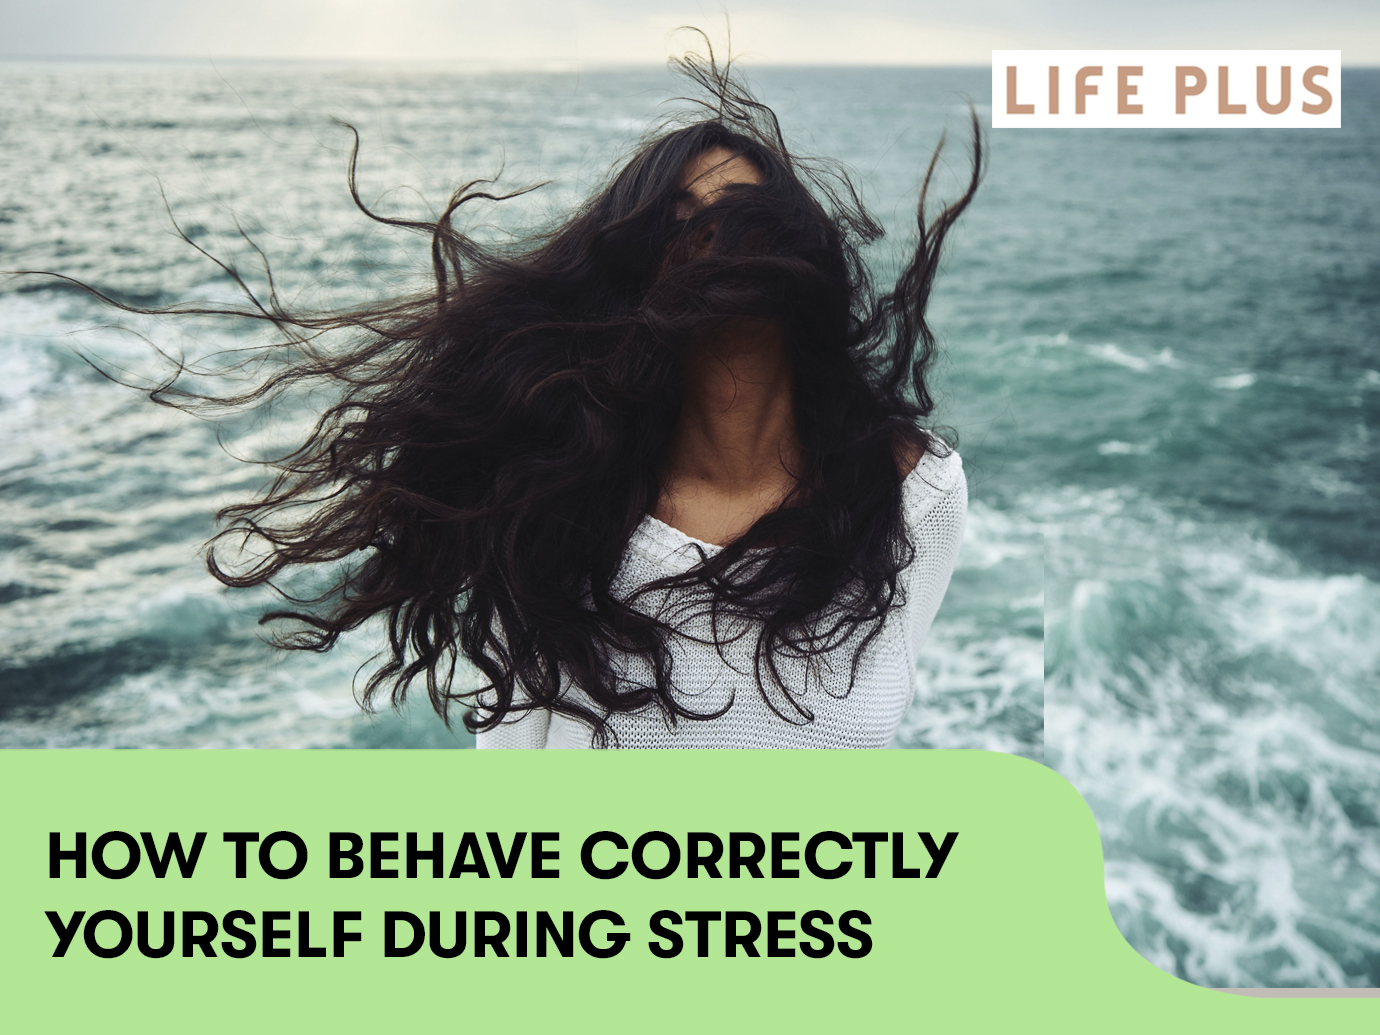 HOW TO BEHAVE CORRECTLY YOURSELF DURING STRESS